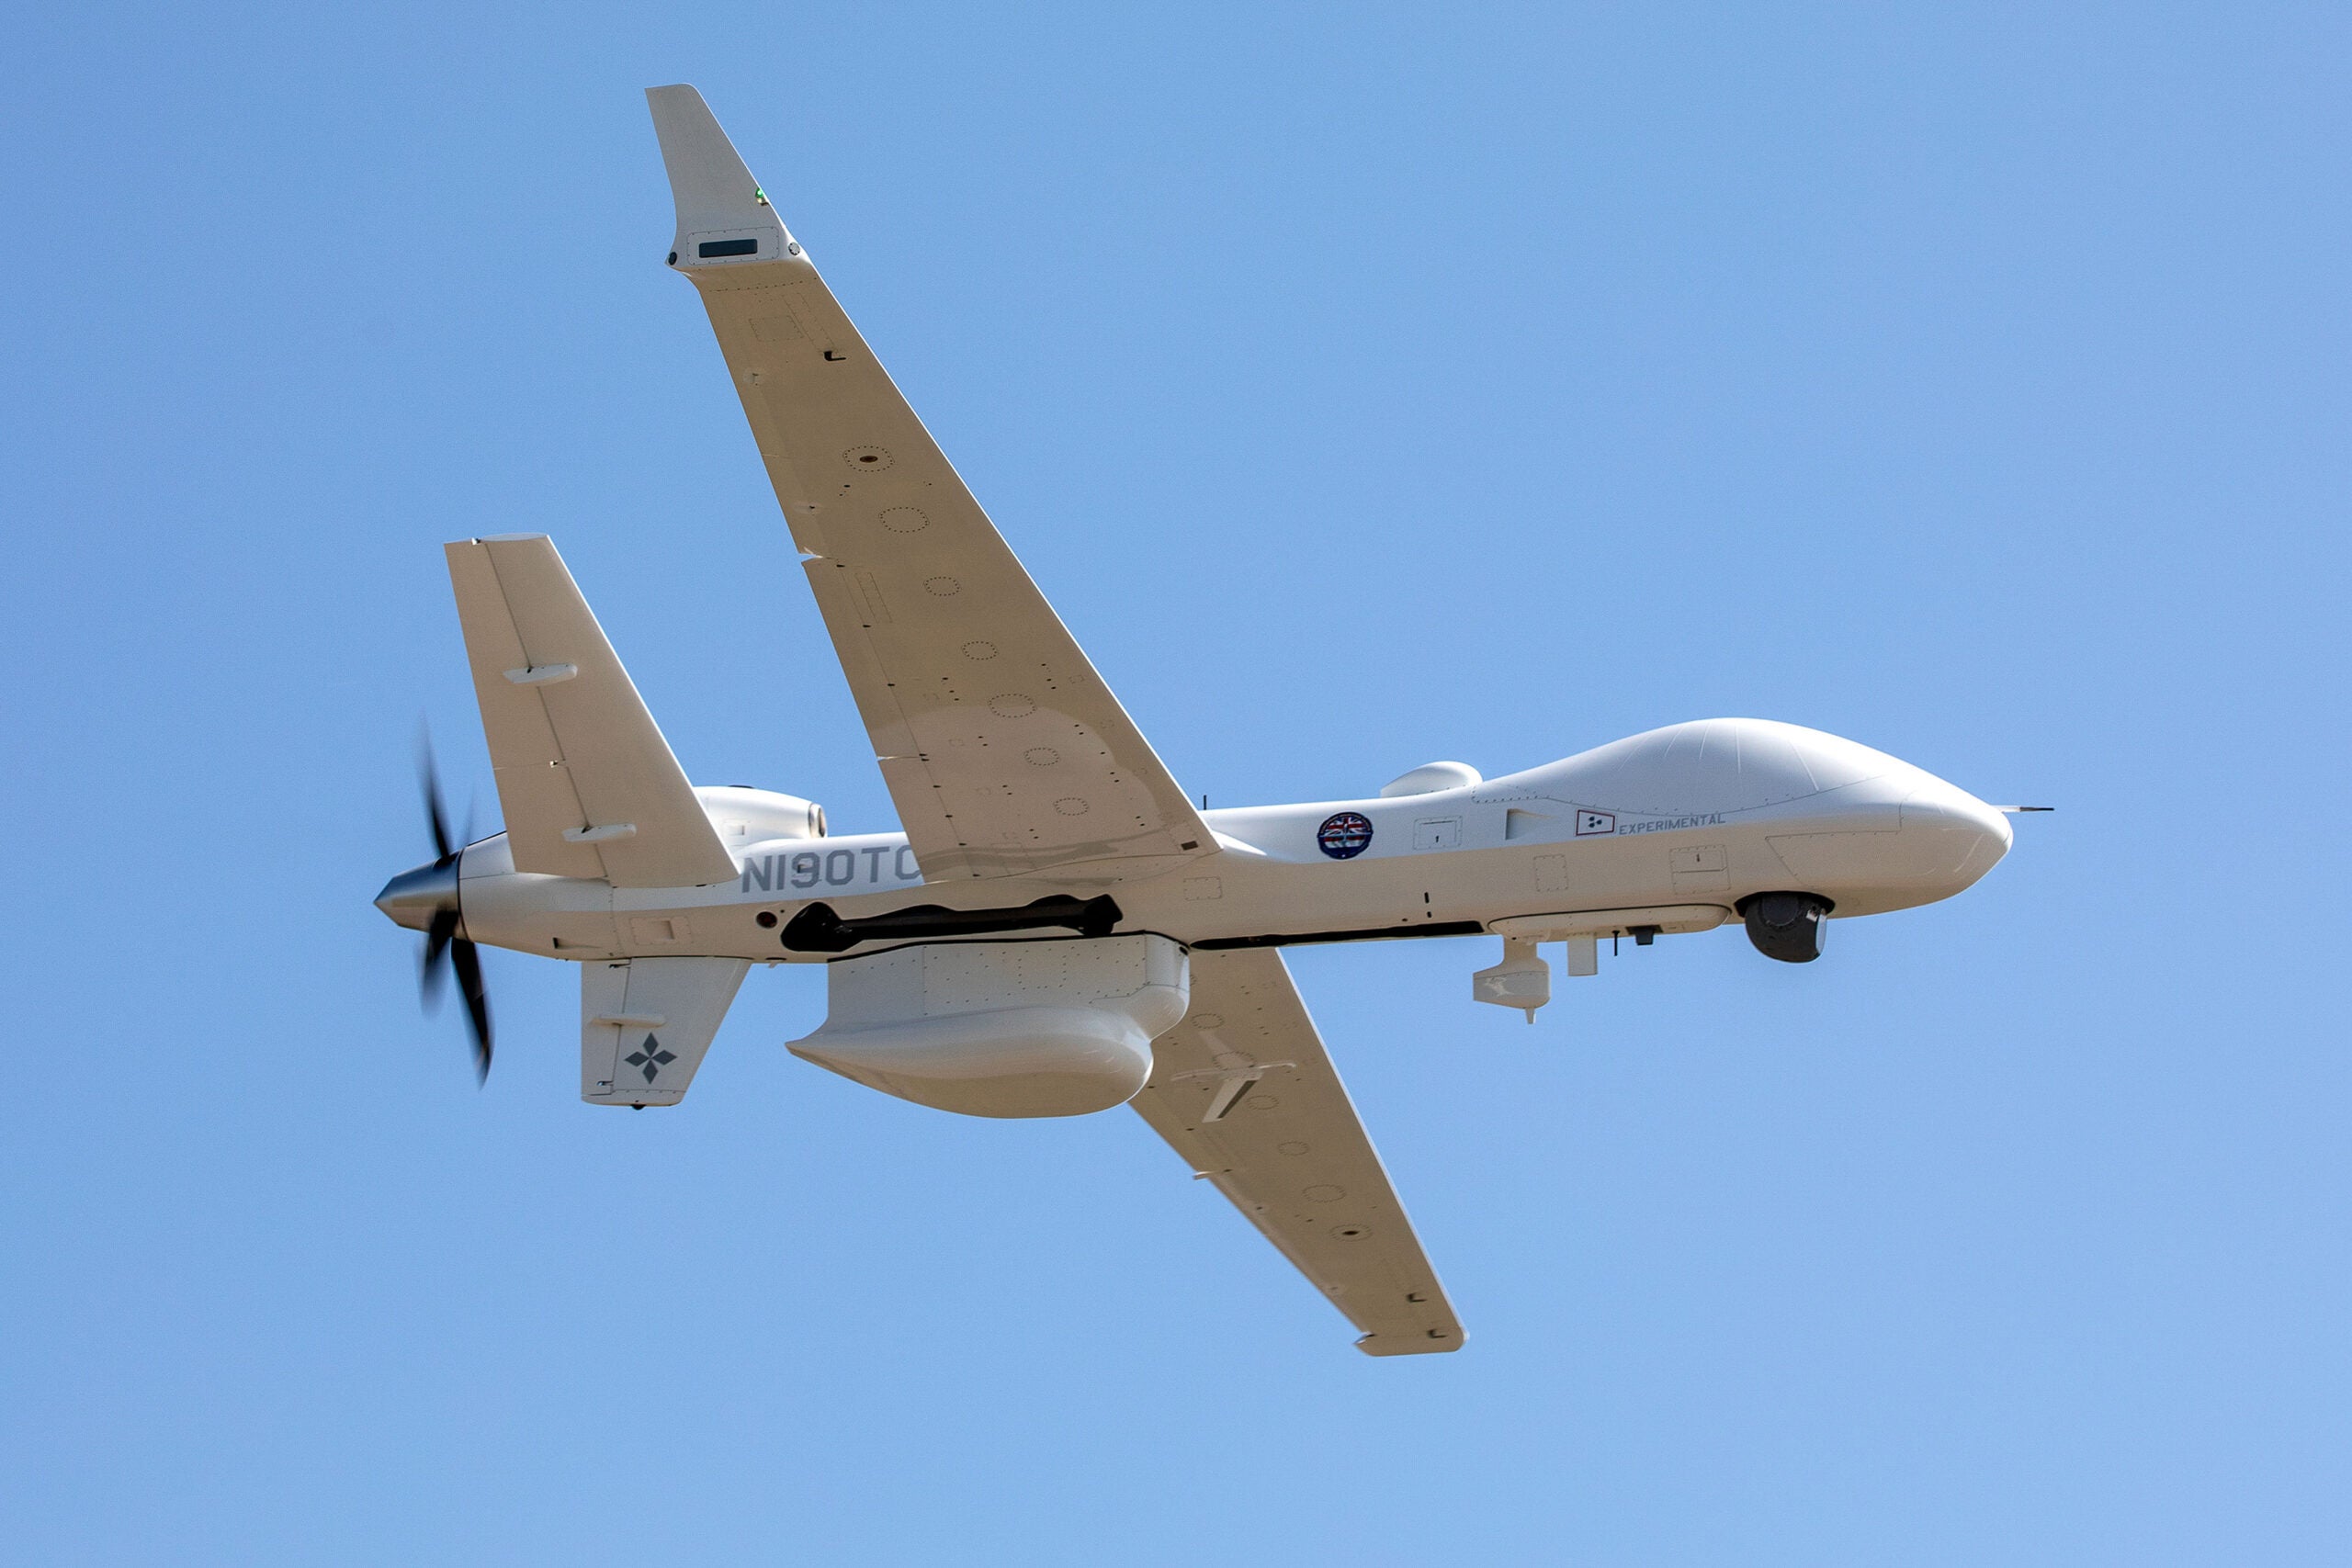 Lao Anger Tomhed UK selects RAF Waddington station to house Protector drone fleet